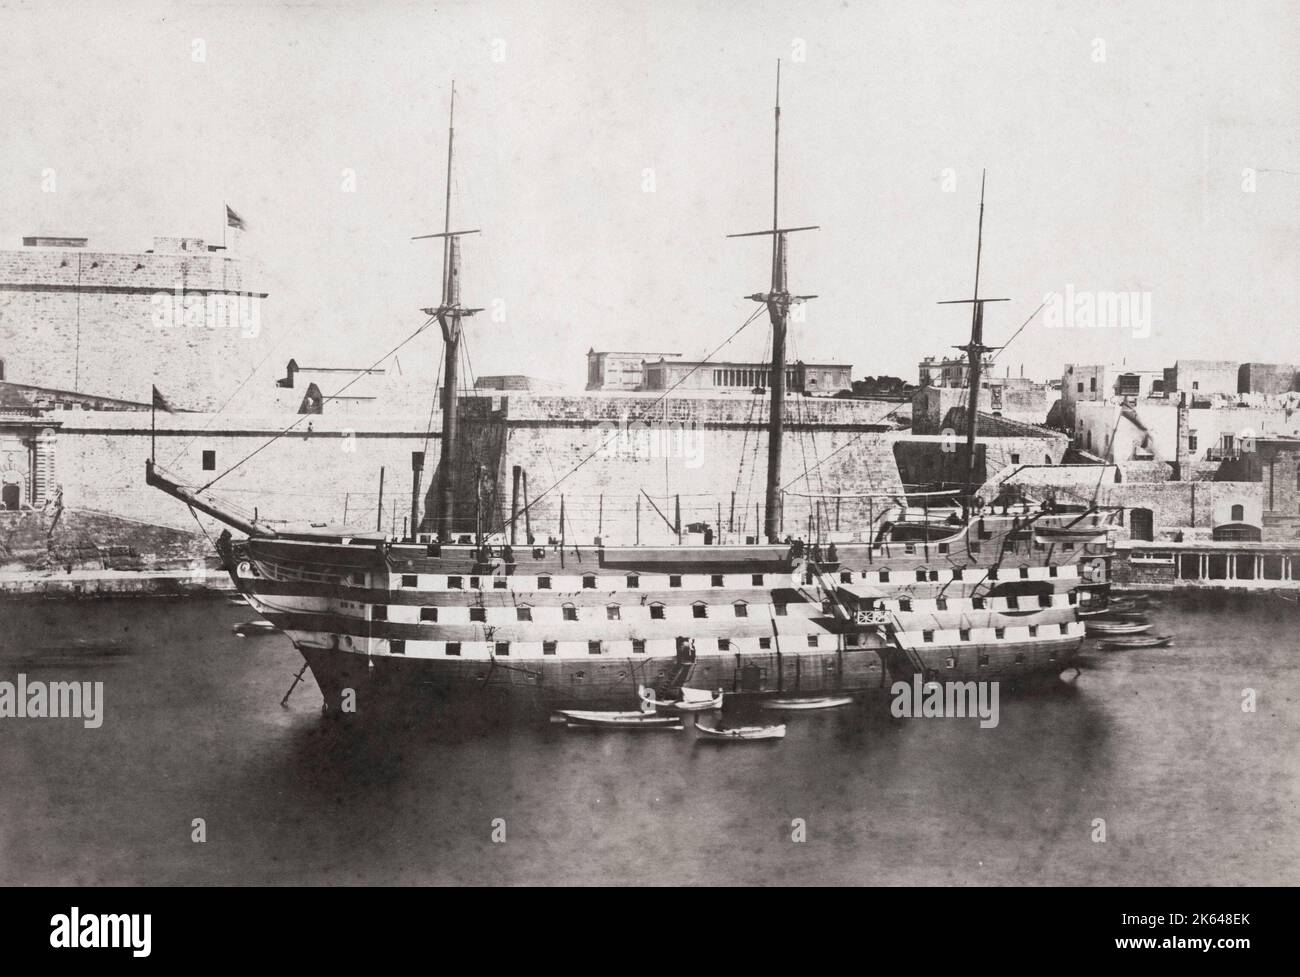 Late 19th century vintage photograph: HMS Hibernia was a 110-gun first-rate ship of the line of the Royal Navy. Flagship of the Royal Navy base Malta until 1902. Stock Photo